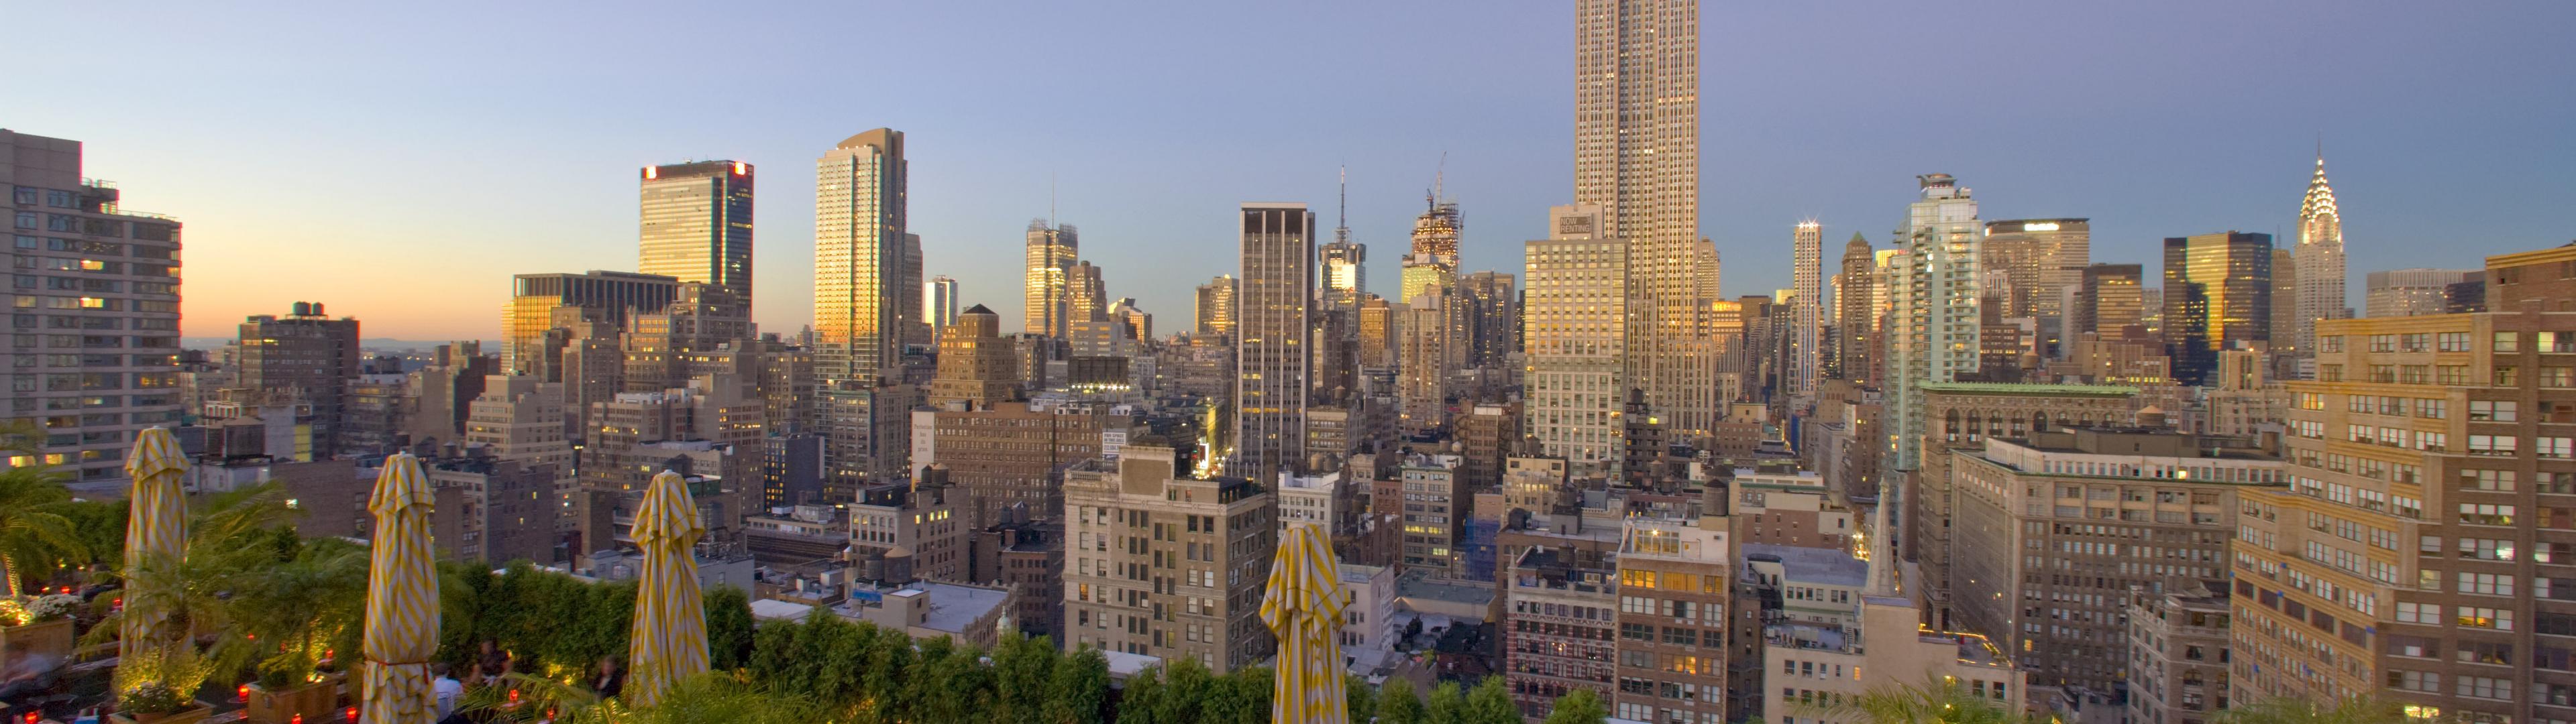 New York City Cityscapes Best Widescreen Background